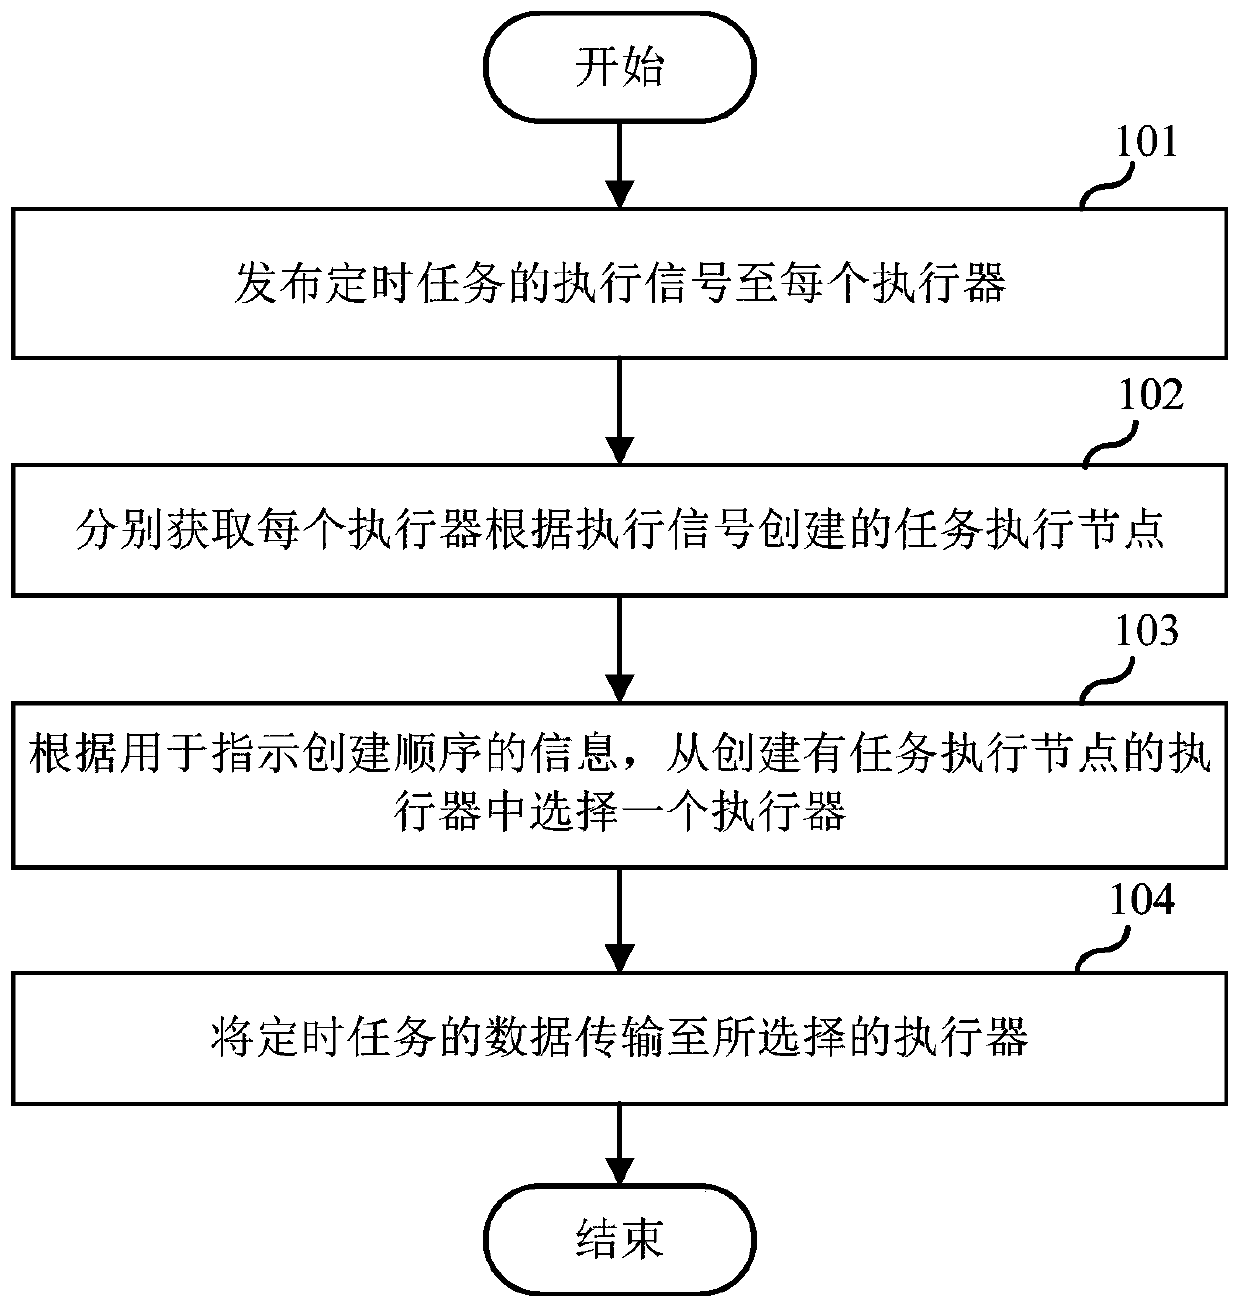 A timing task scheduling method and a related device